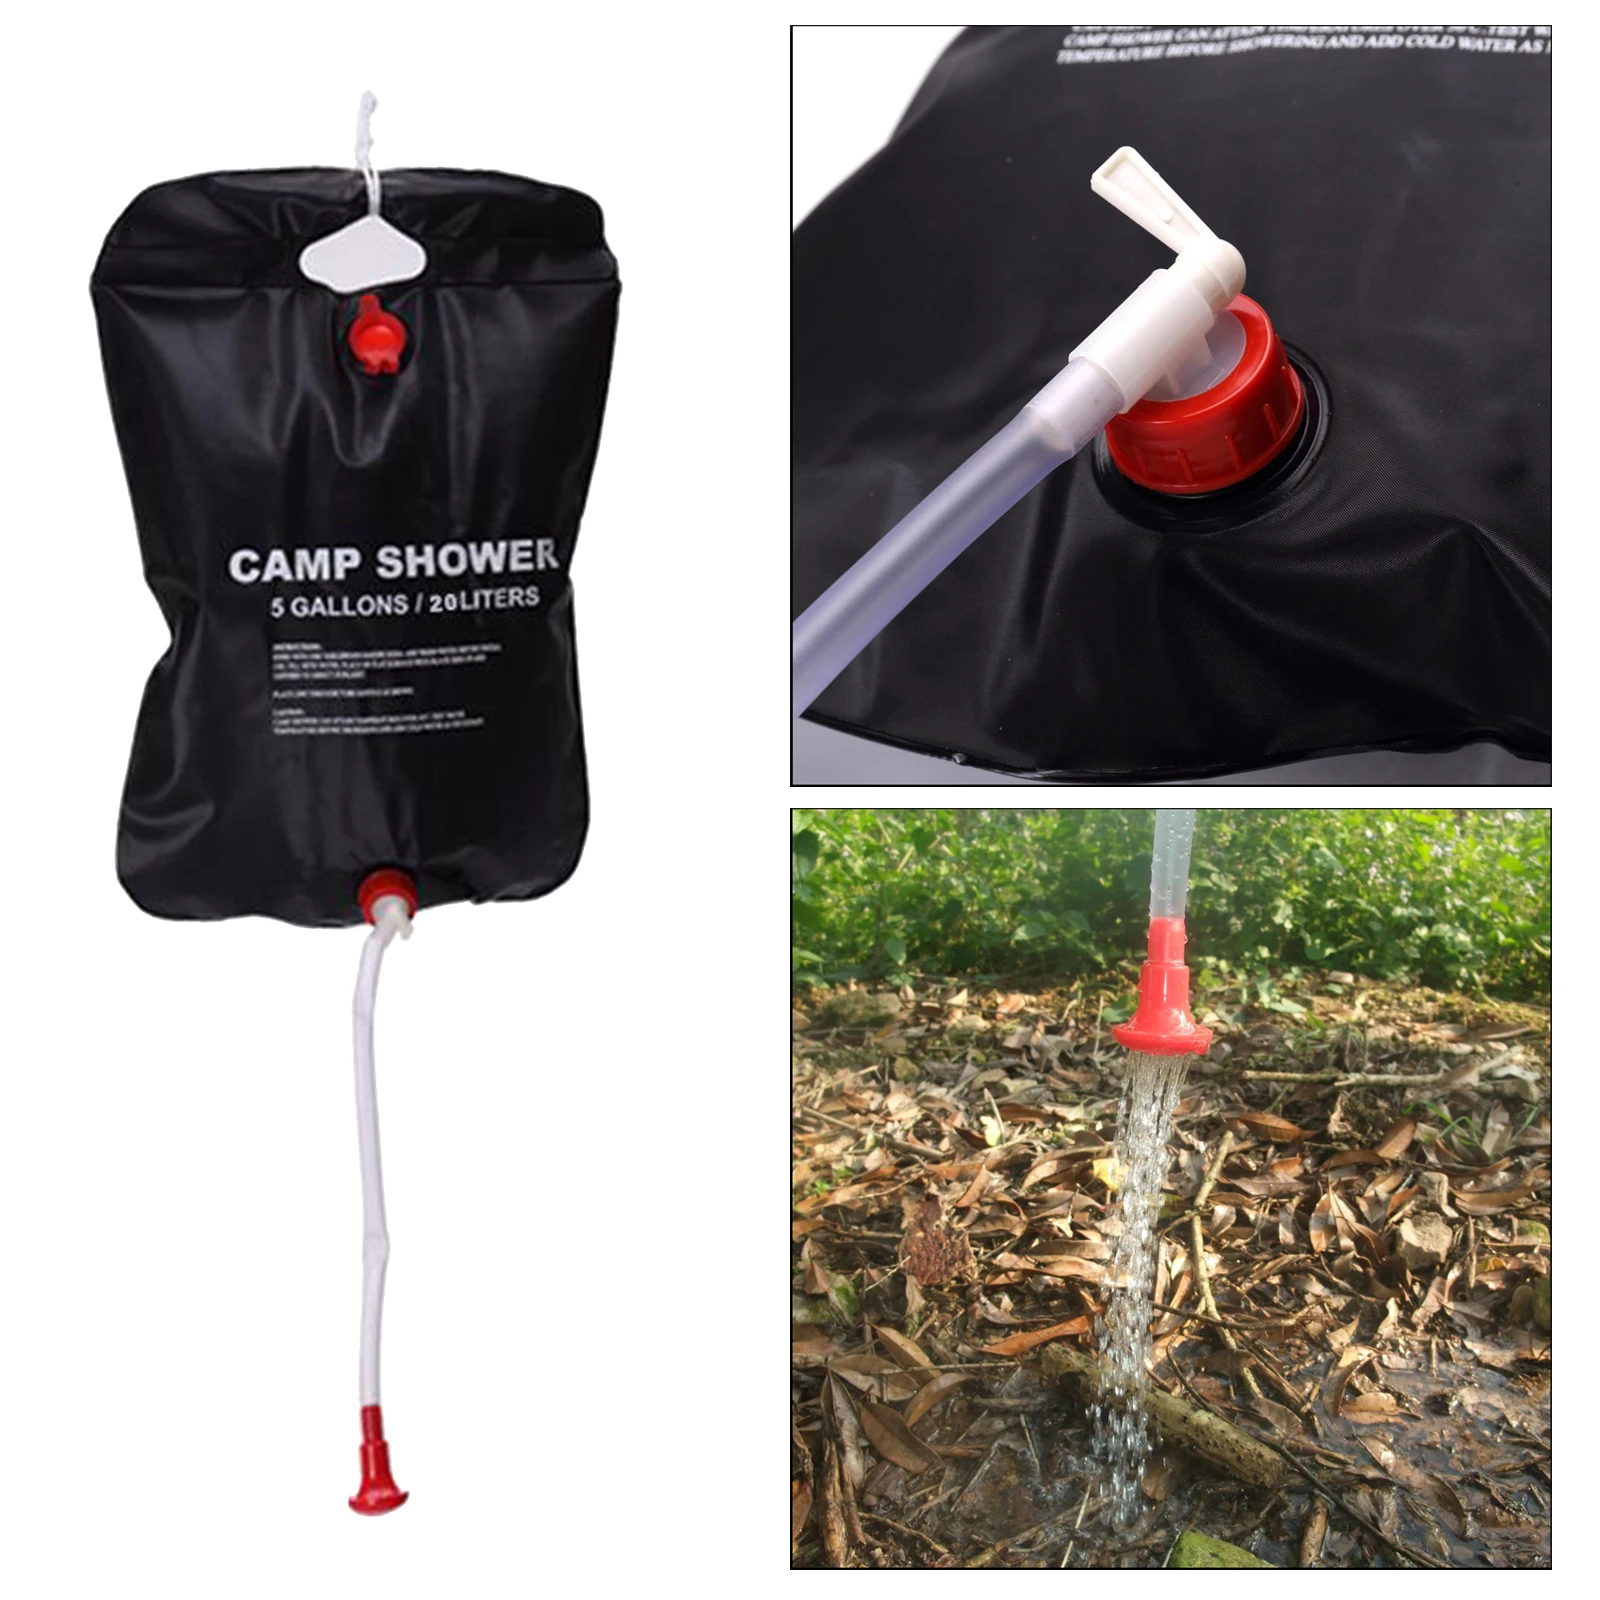 Removable Hose Folding PVC Portable Camping Shower Bag for Outdoor Beach Traveling Hiking camping gear and accessories